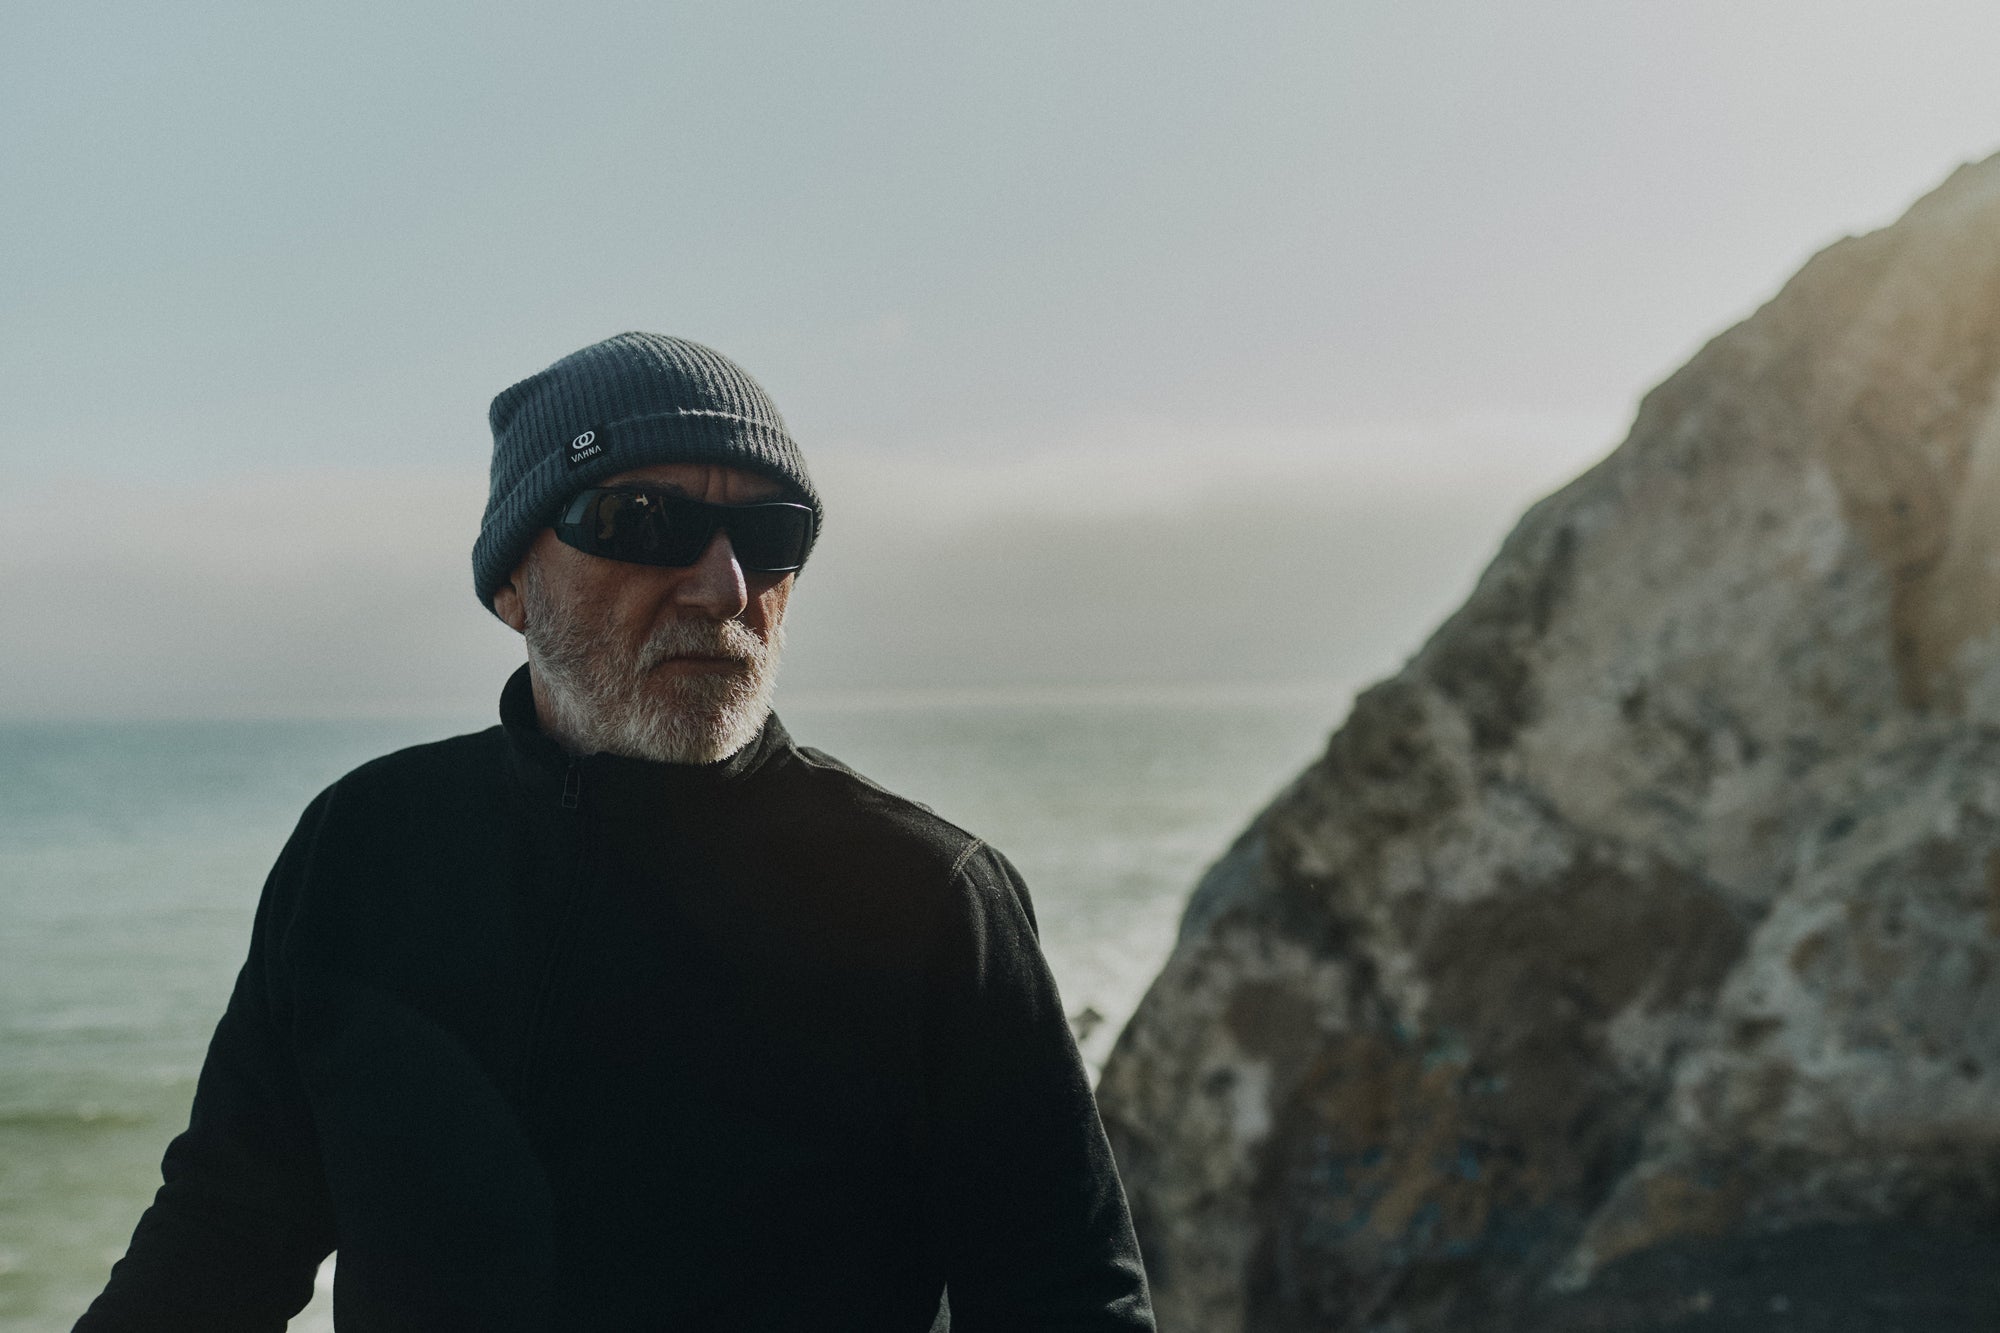 Ralph Dunning standing on a cliff that overlooks the Pacific ocean wearing the Foreign Rider Quarter Zip Sweatshirt